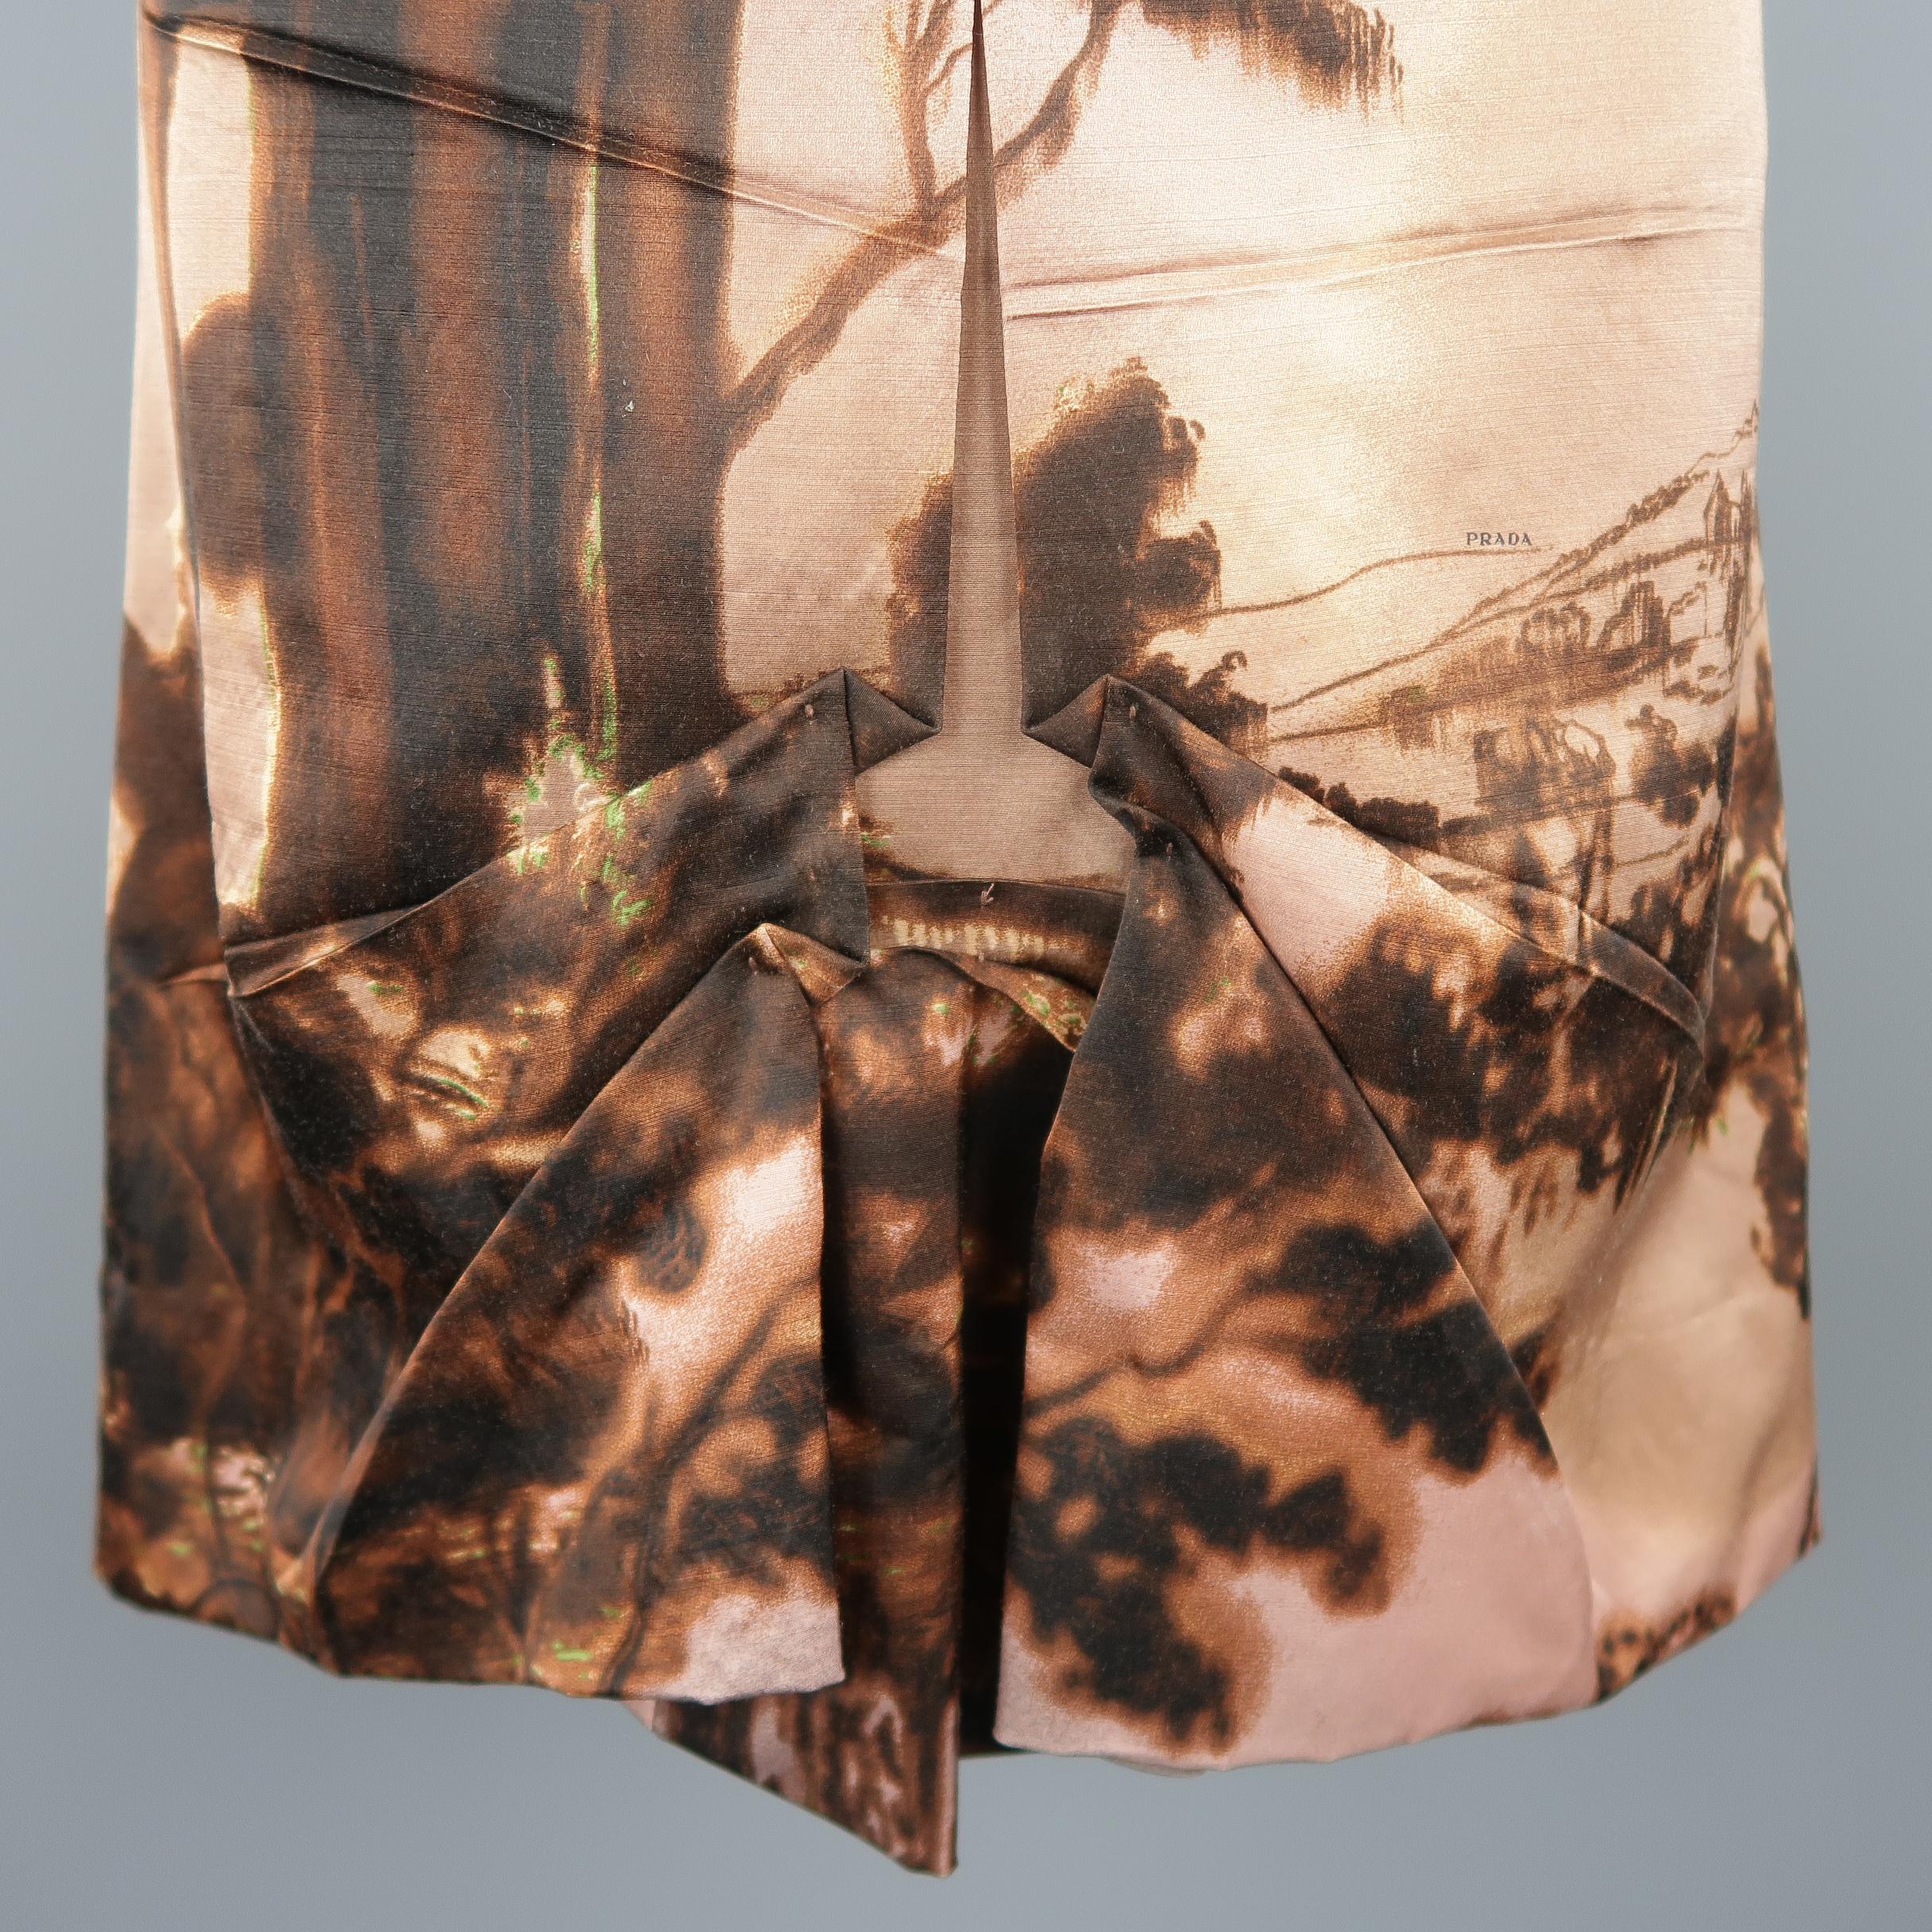 This Prada A-line skirt comes in muted pink and brown wool silk blend matte satin with a landscape graphic print motif and symmetrical Origami pleated front. Made in Italy.
 
Excellent Pre-Owned Condition.
Marked: IT 38
 
Measurements:
 
Waist: 27